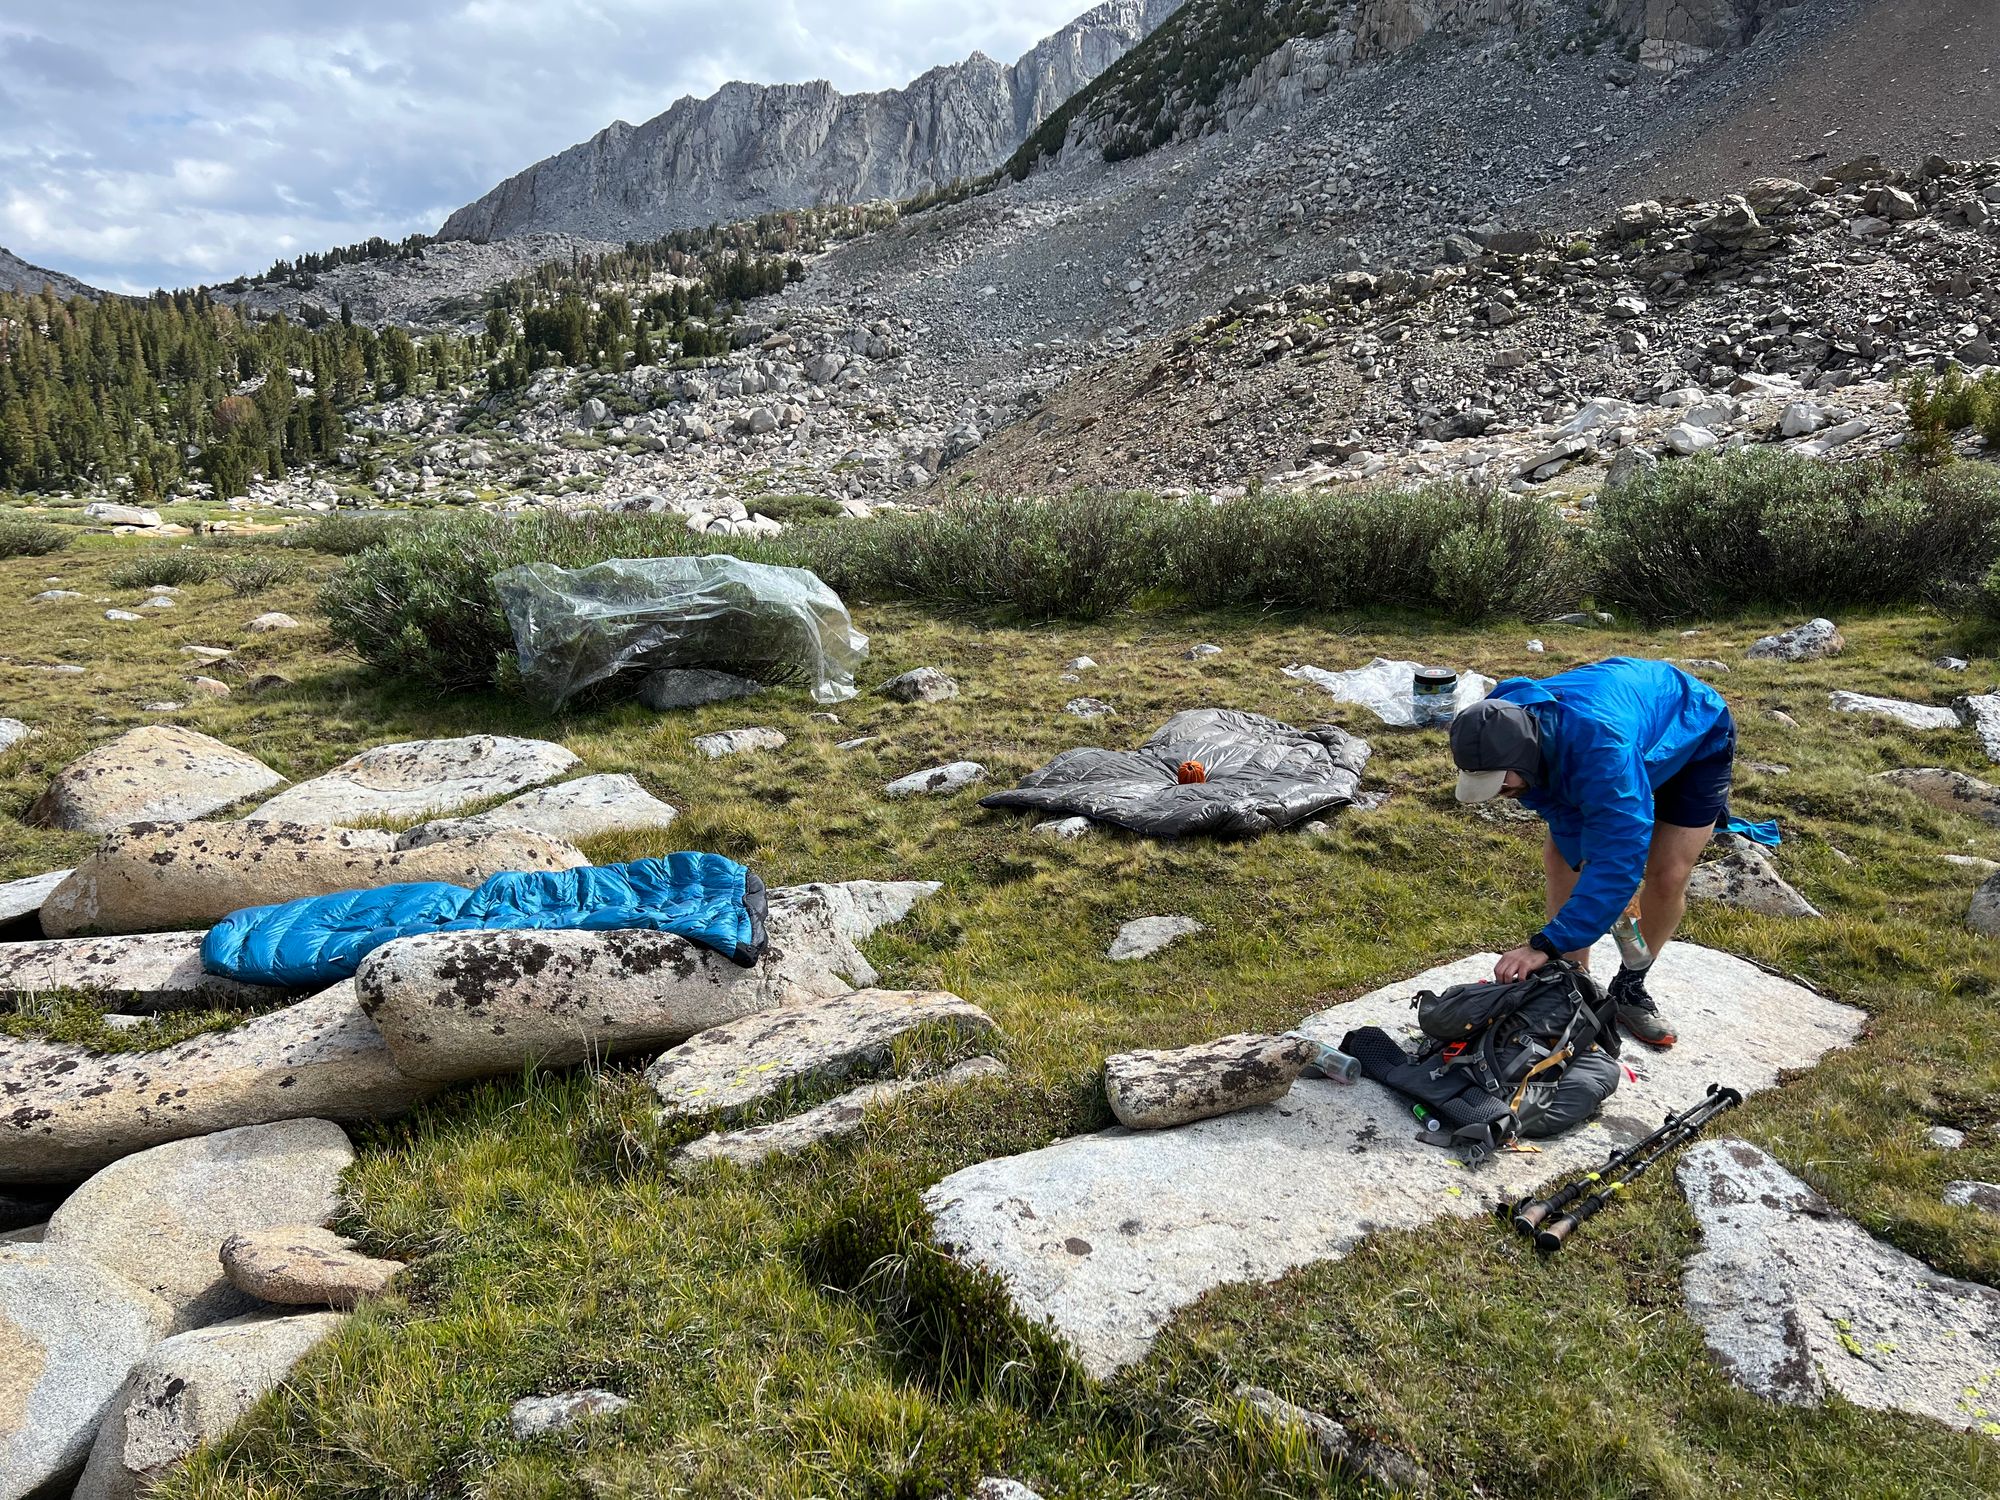 Sleeping bags and ground sheets drying out on the ground